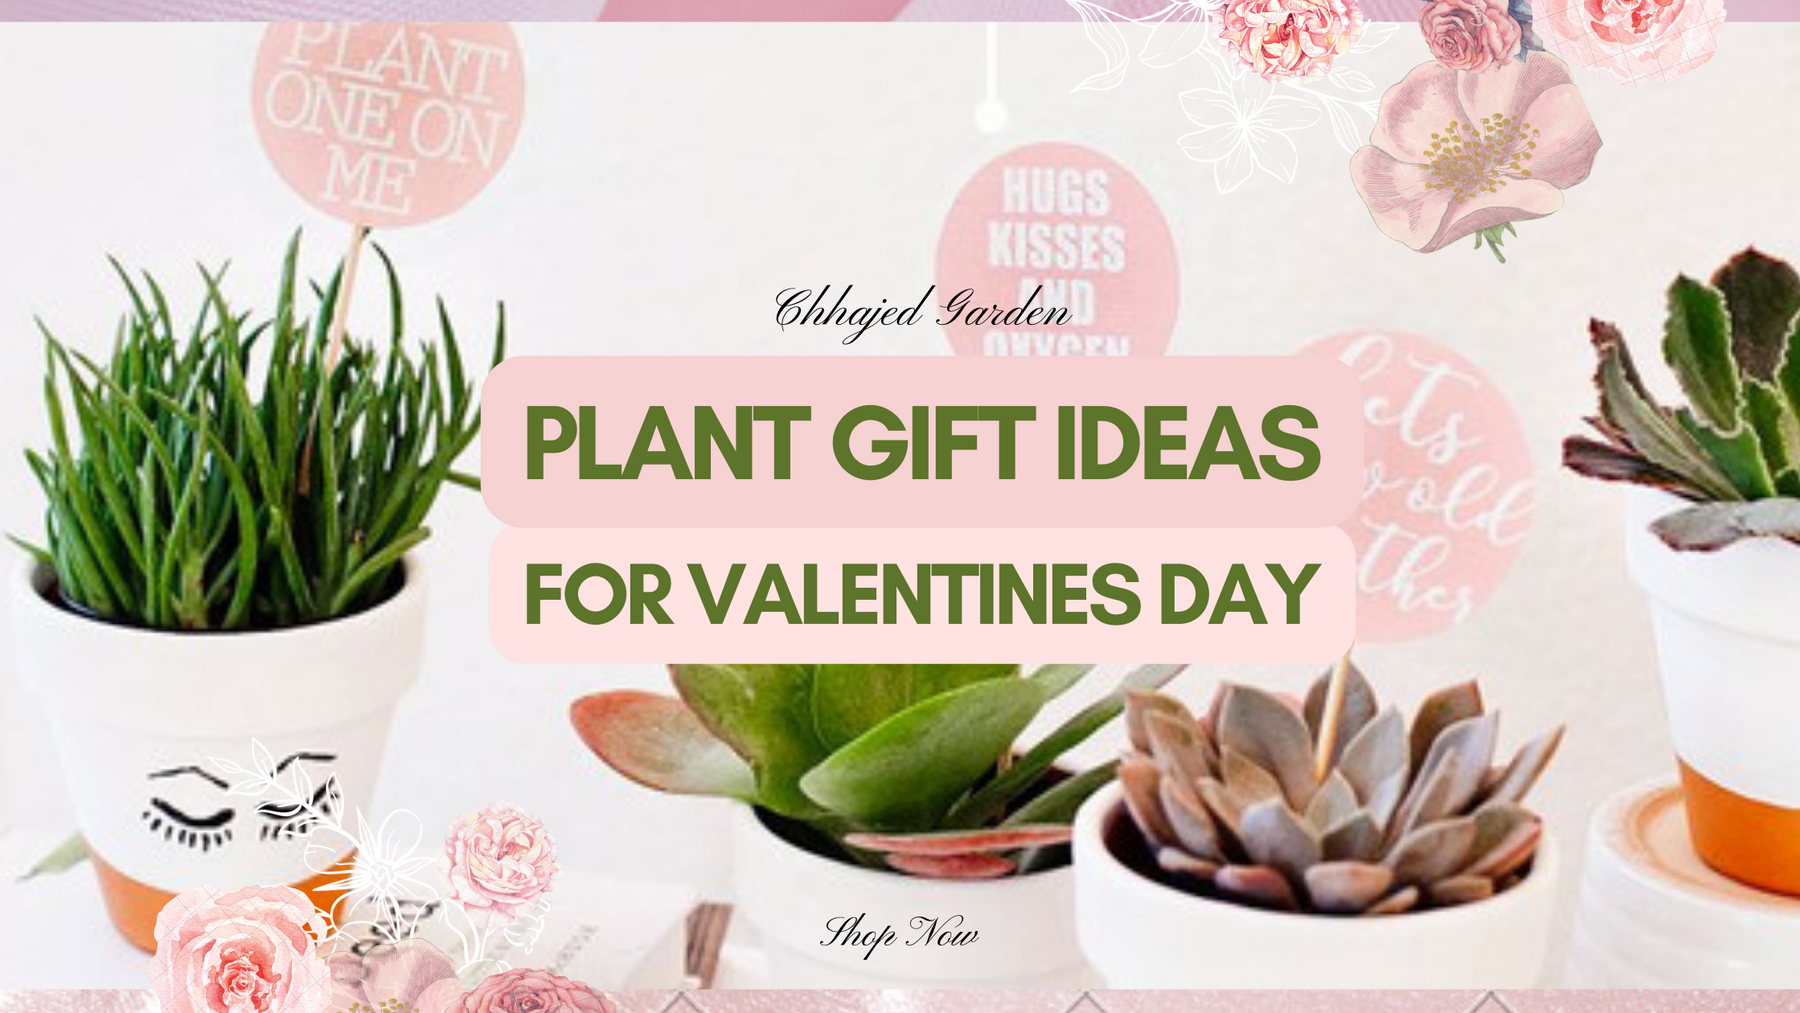 10 Plant Gift Ideas for Valentine's Day